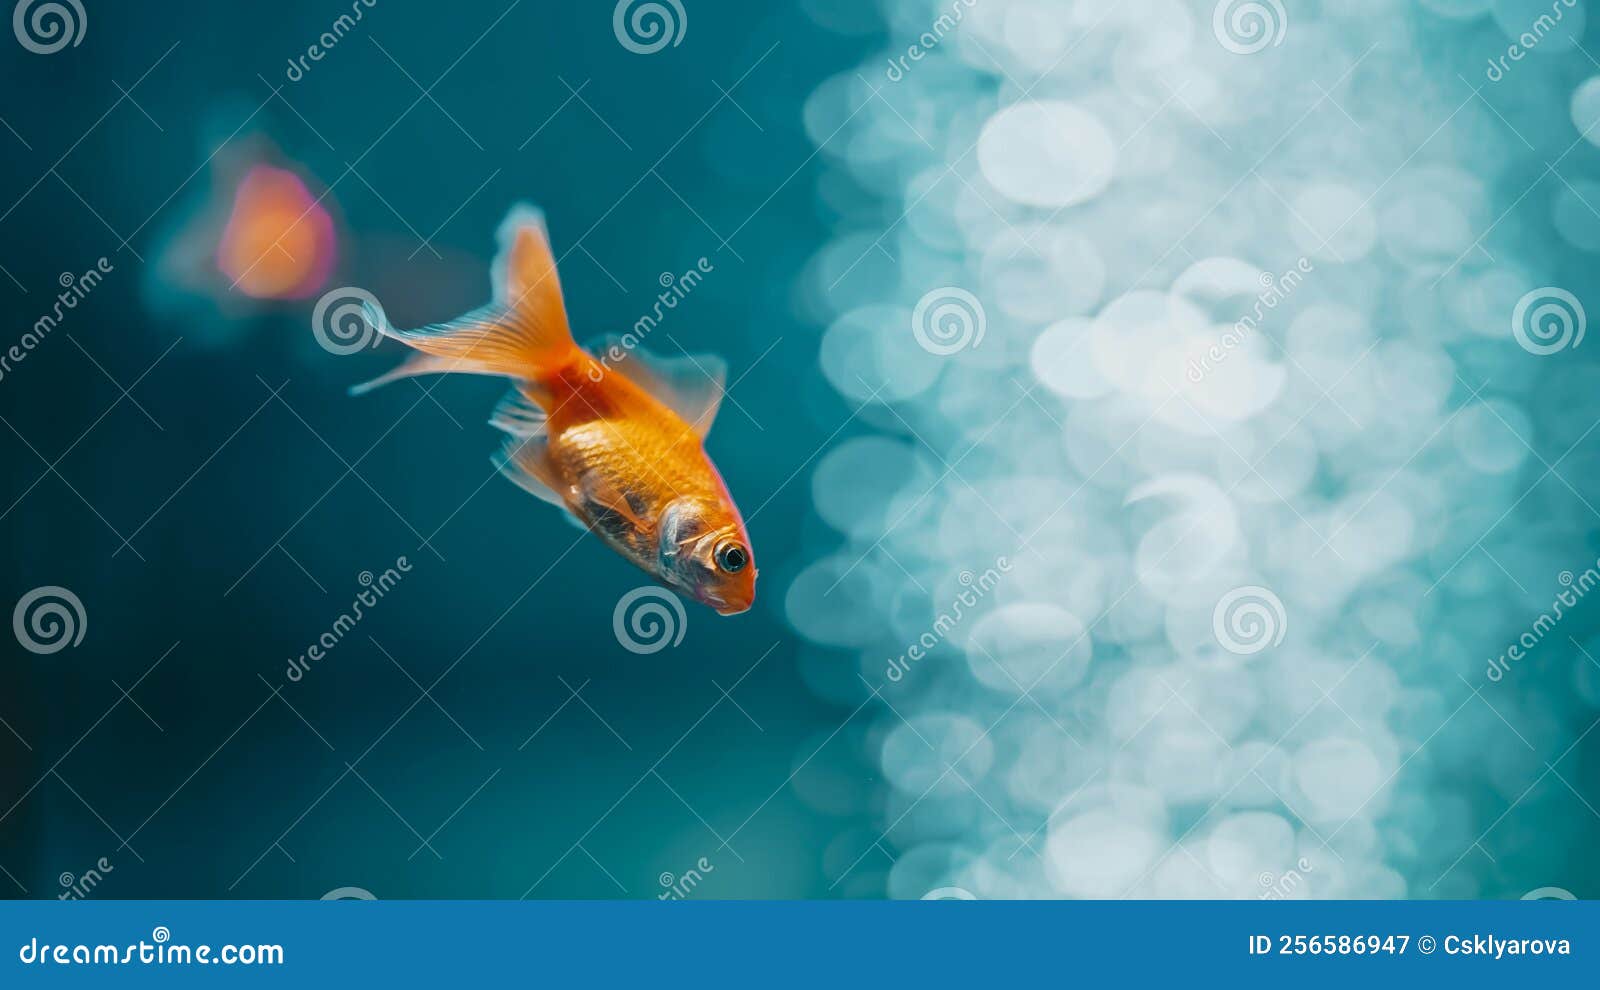 Goldfish with Fins Swimming in Aquarium on Blue Background. Fish